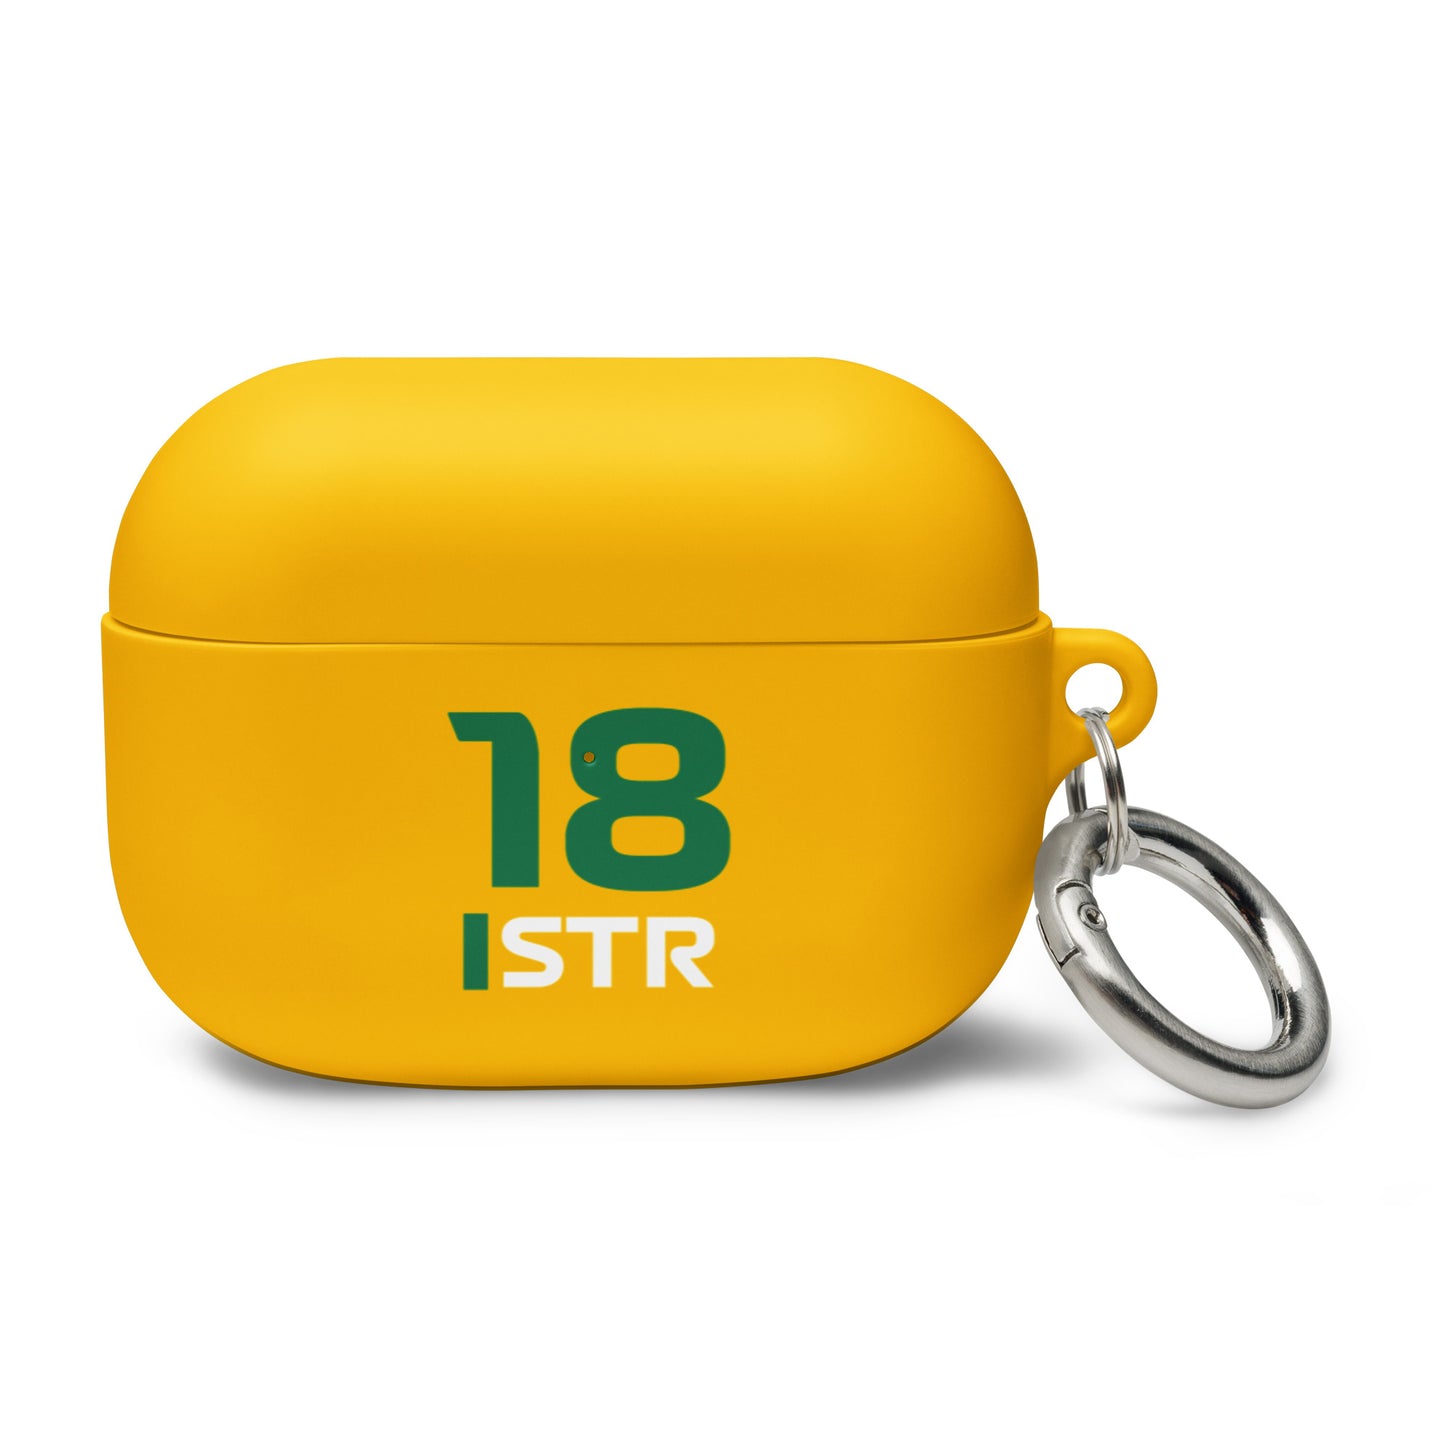 Lance Stroll AirPods Case pro yellow